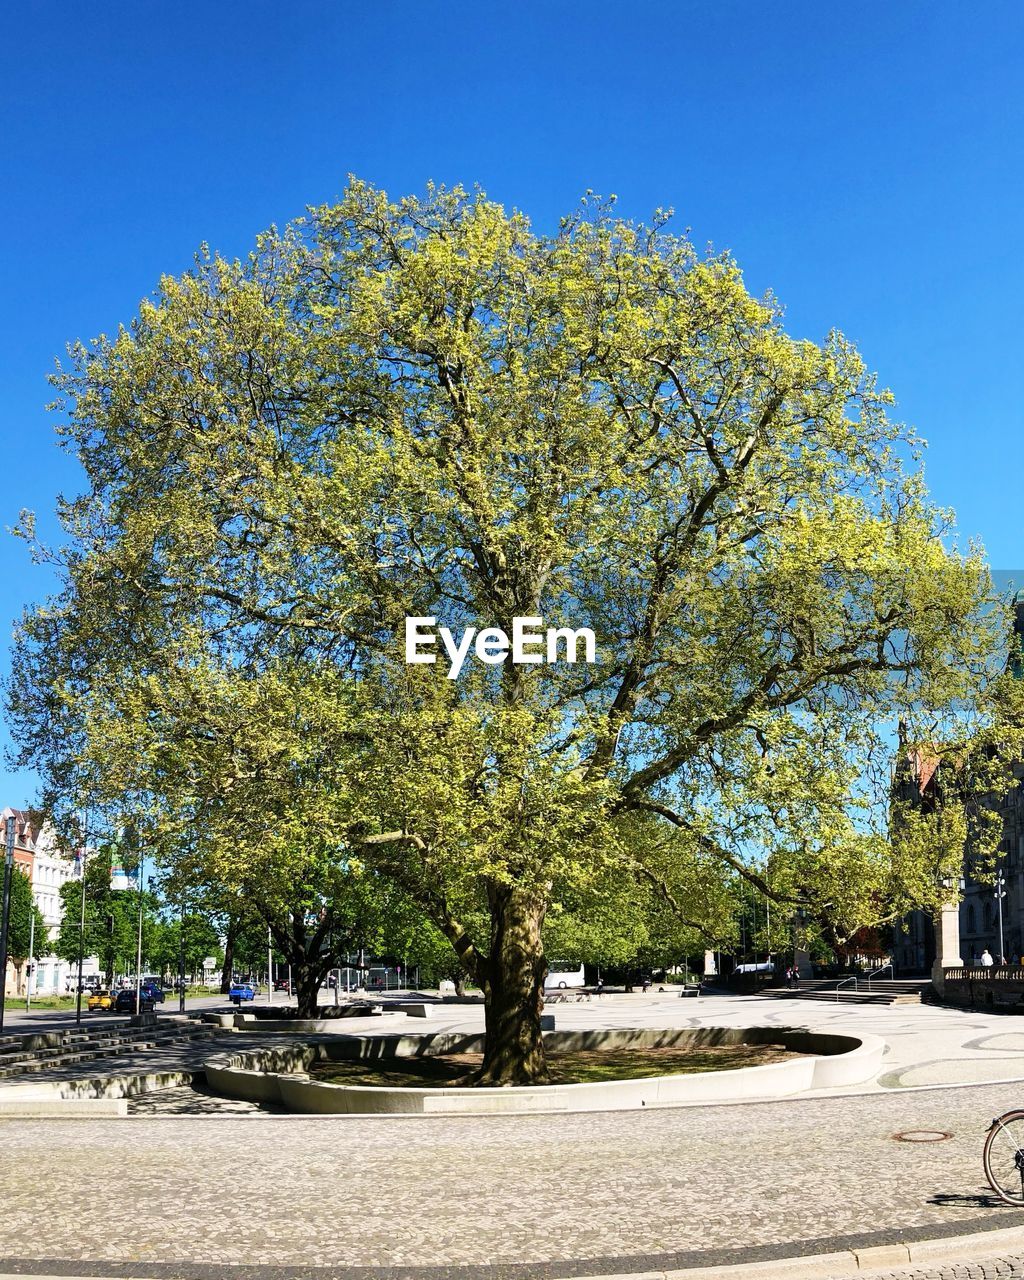 VIEW OF TREE IN PARK